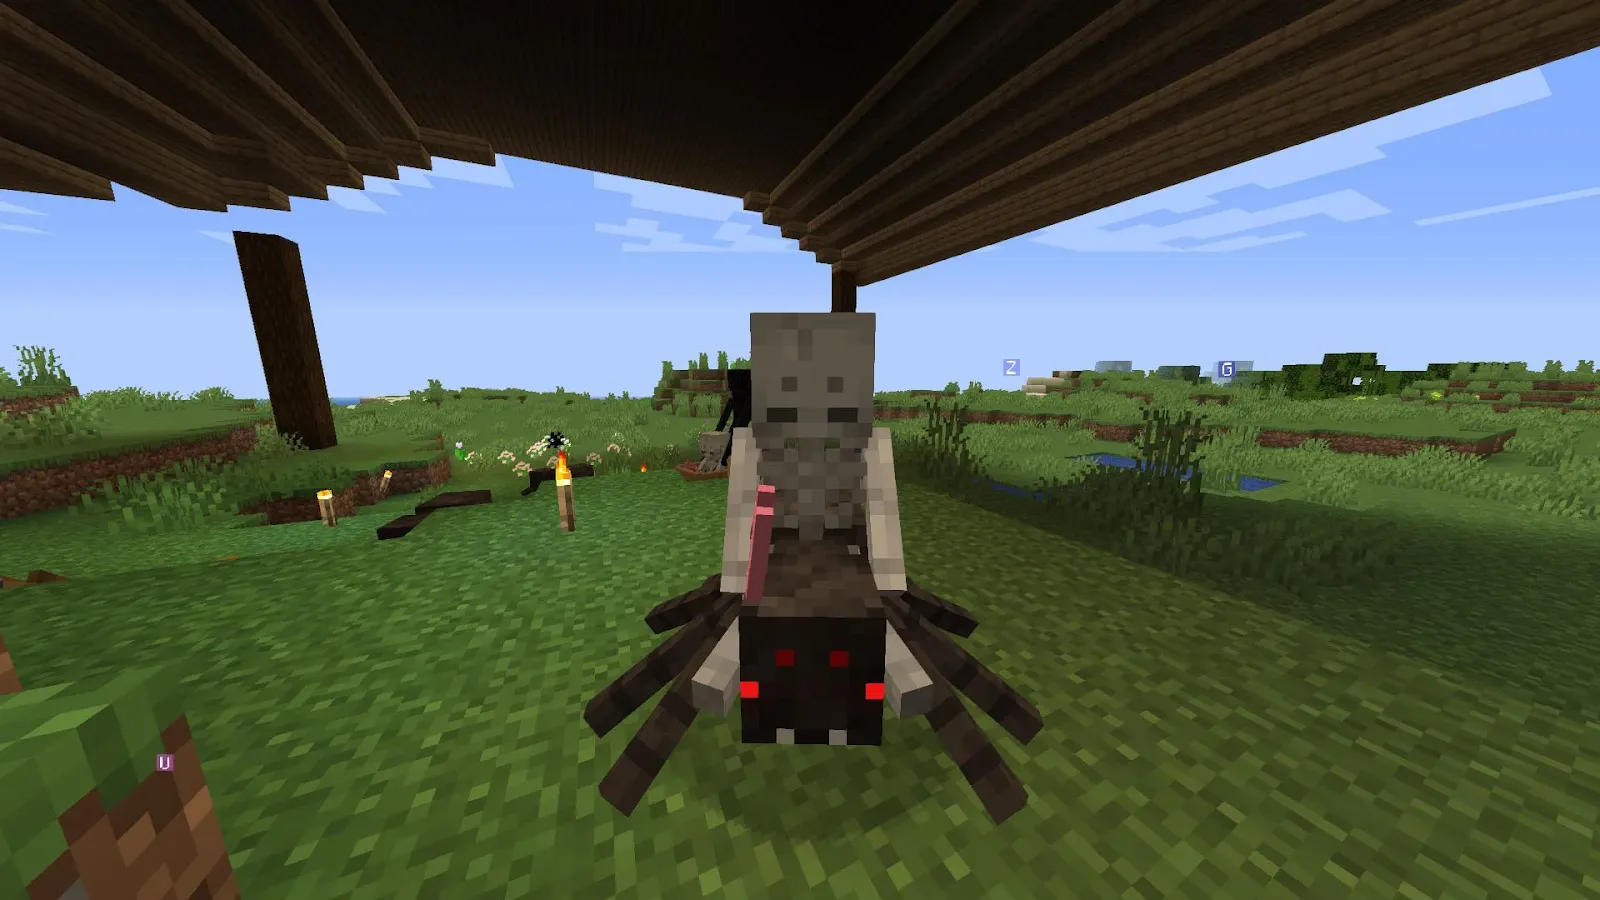 An image of a spider jockey in Minecraft